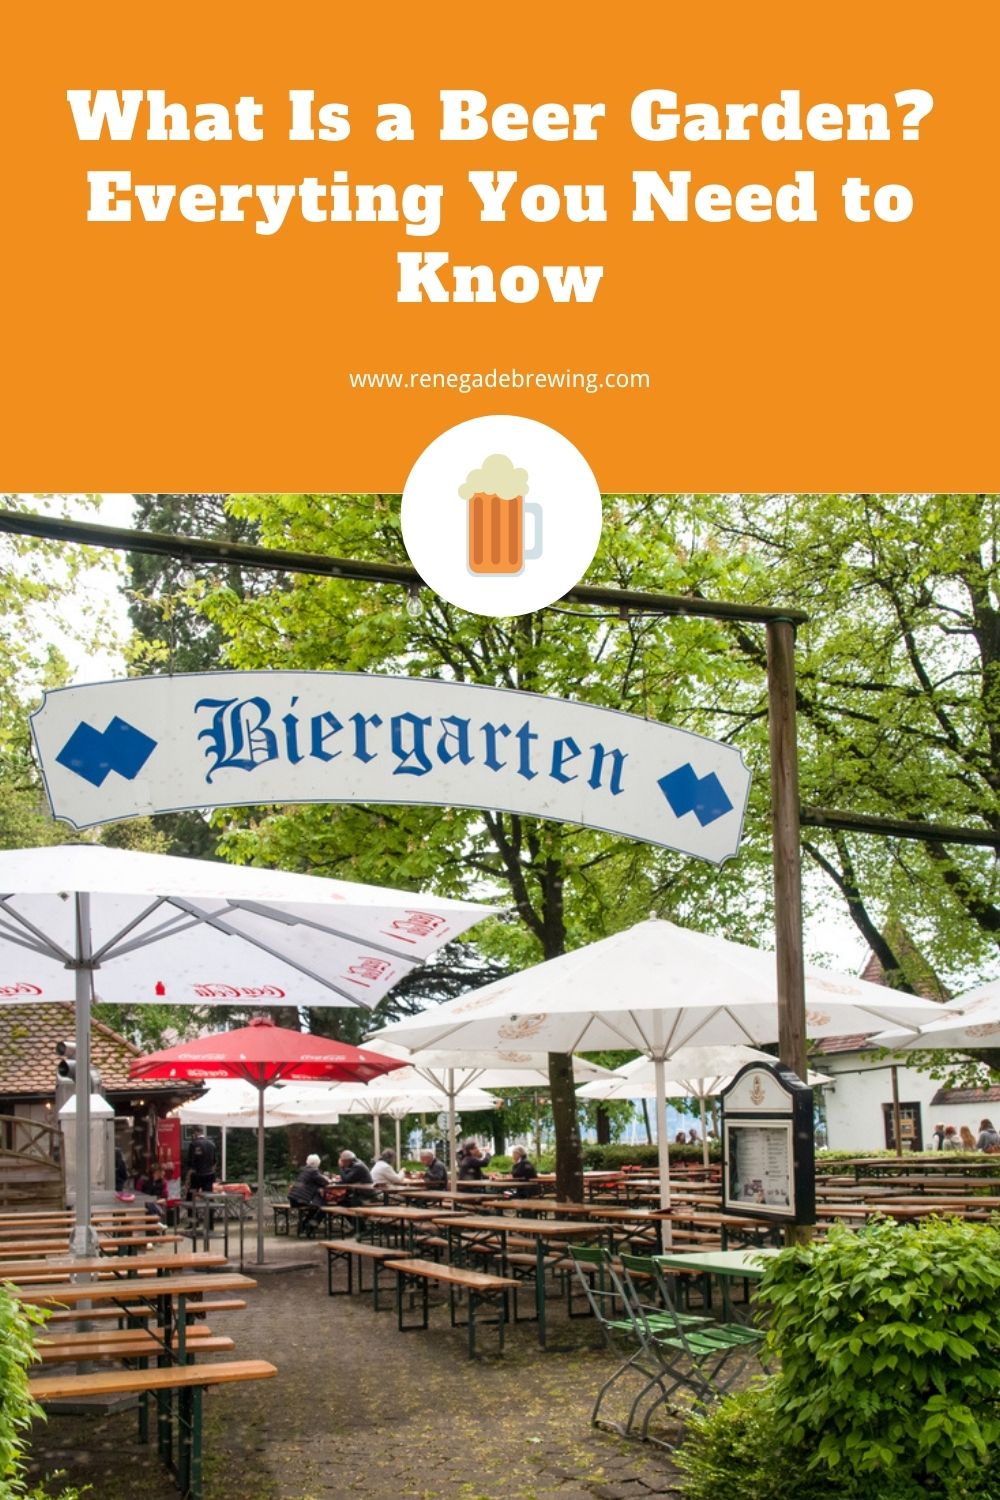 10 DIY The Guide to Beer Gardens Tips You May Have Missed